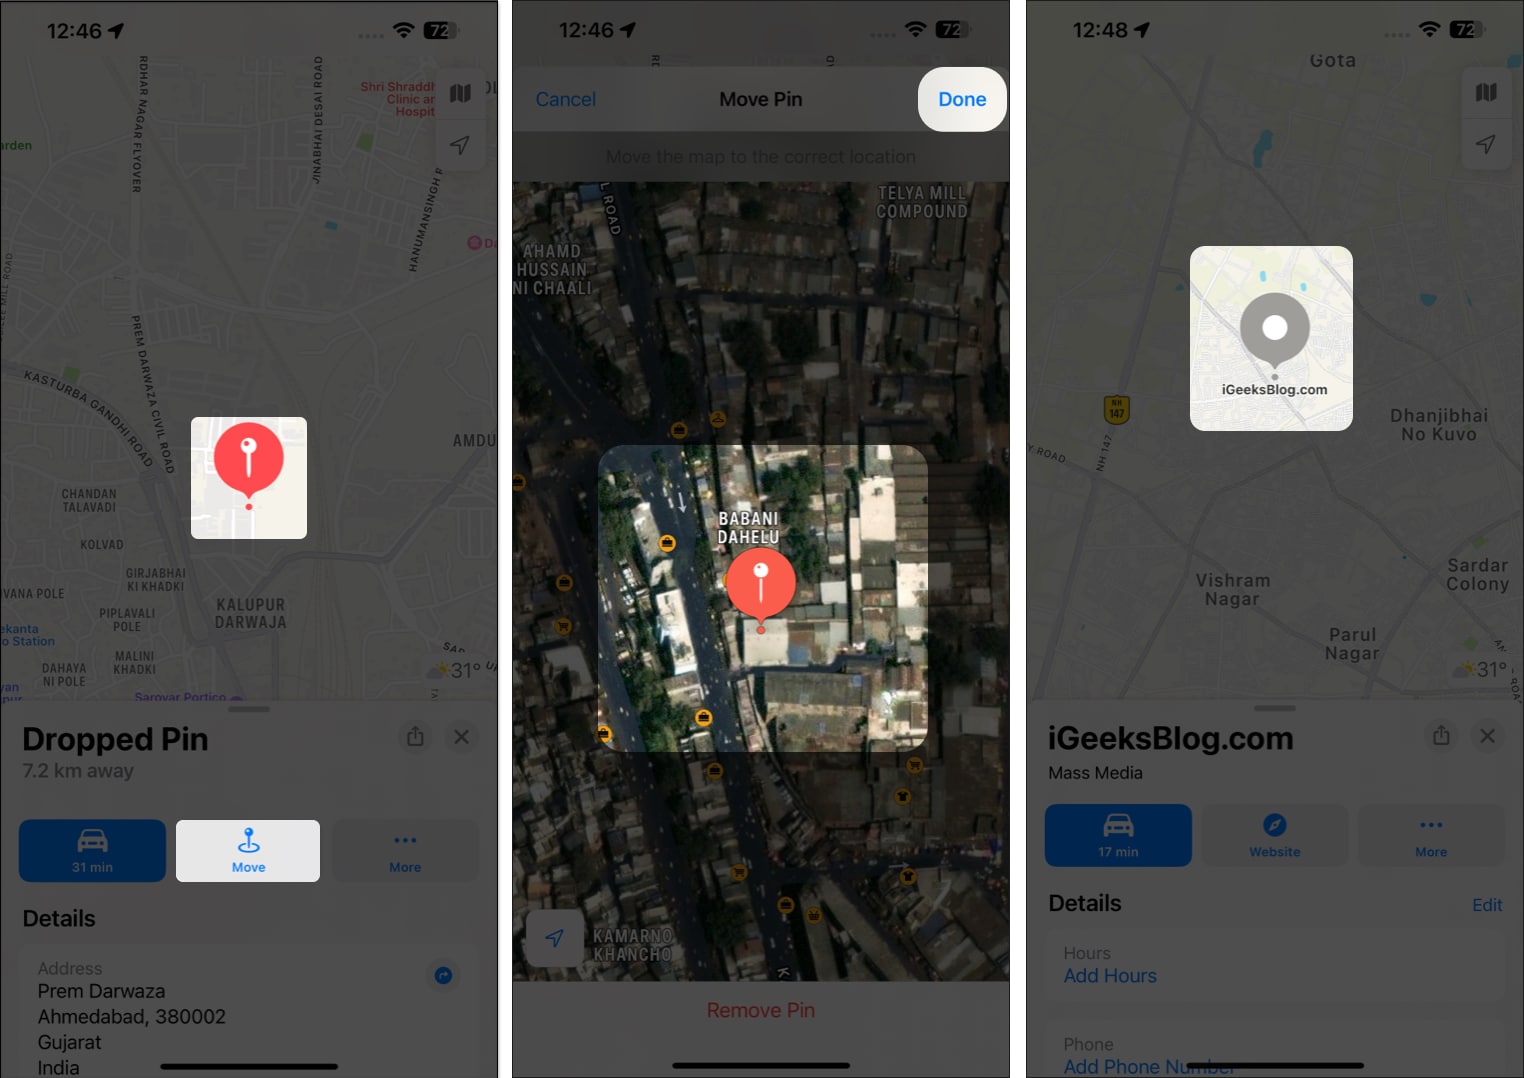 Long-press a location, tap more, tap done, to pin a location in Apple Maps